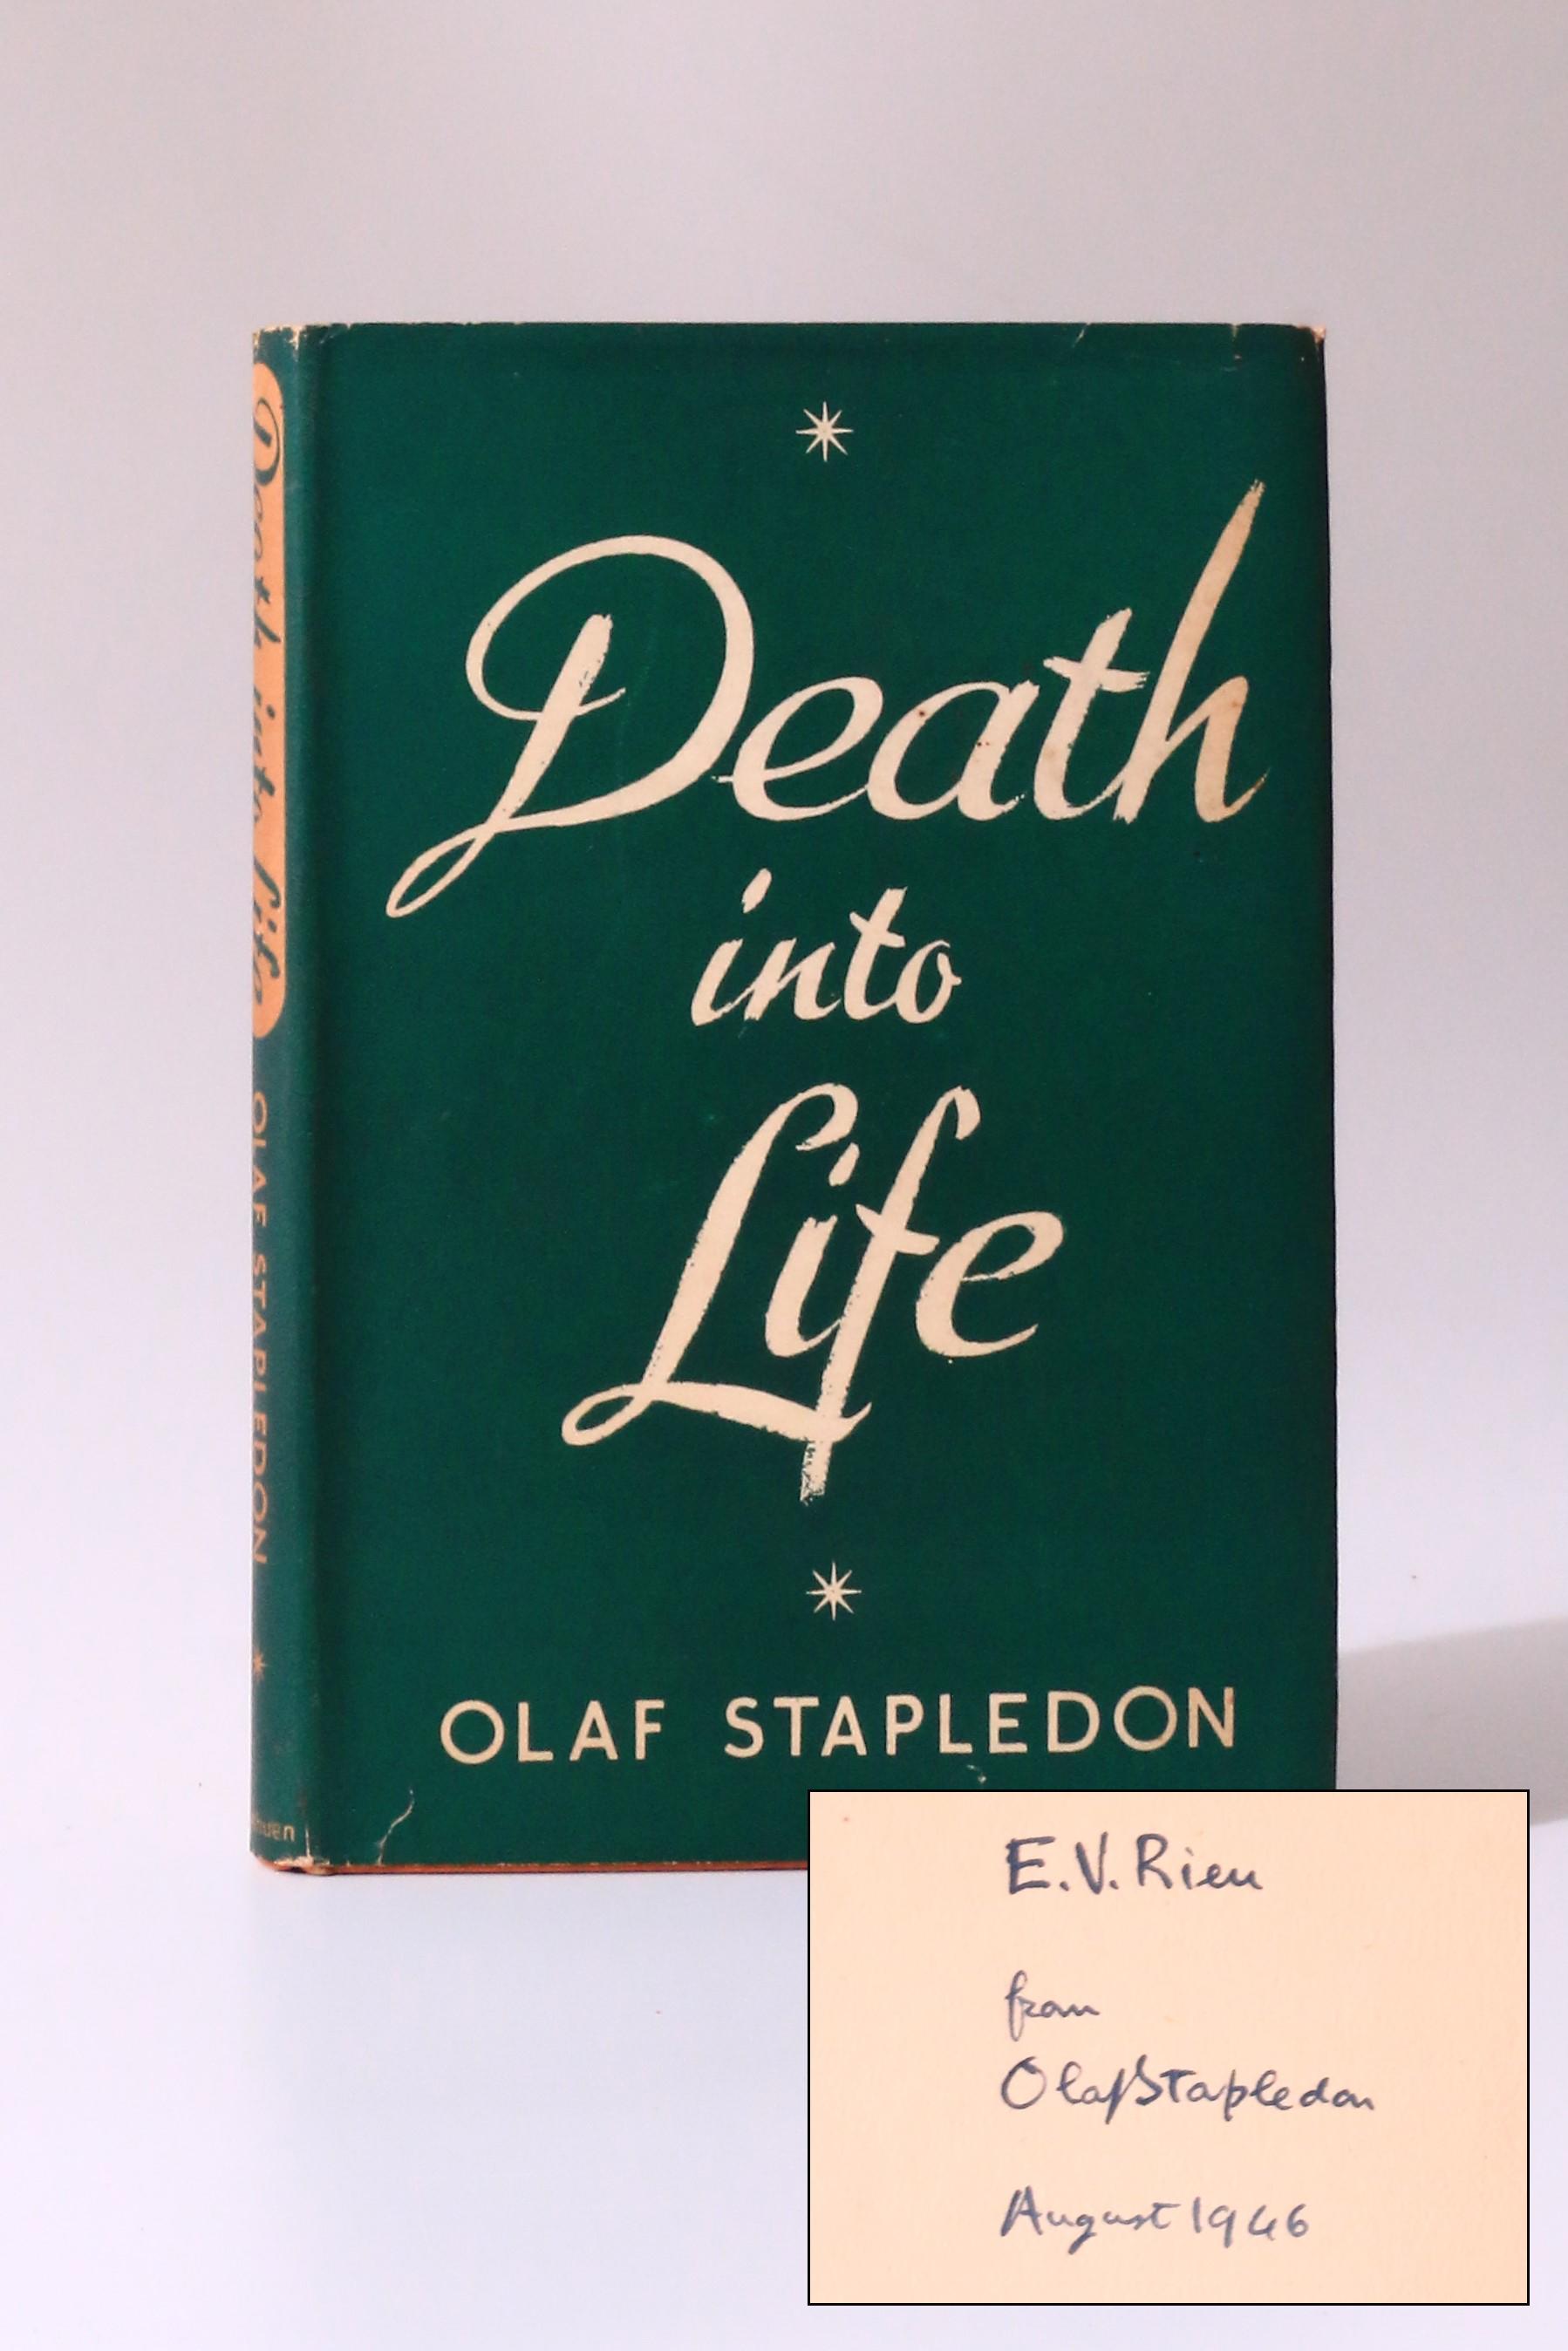 Olaf Stapledon - Death into Life - Methuen, 1946, Signed First Edition.